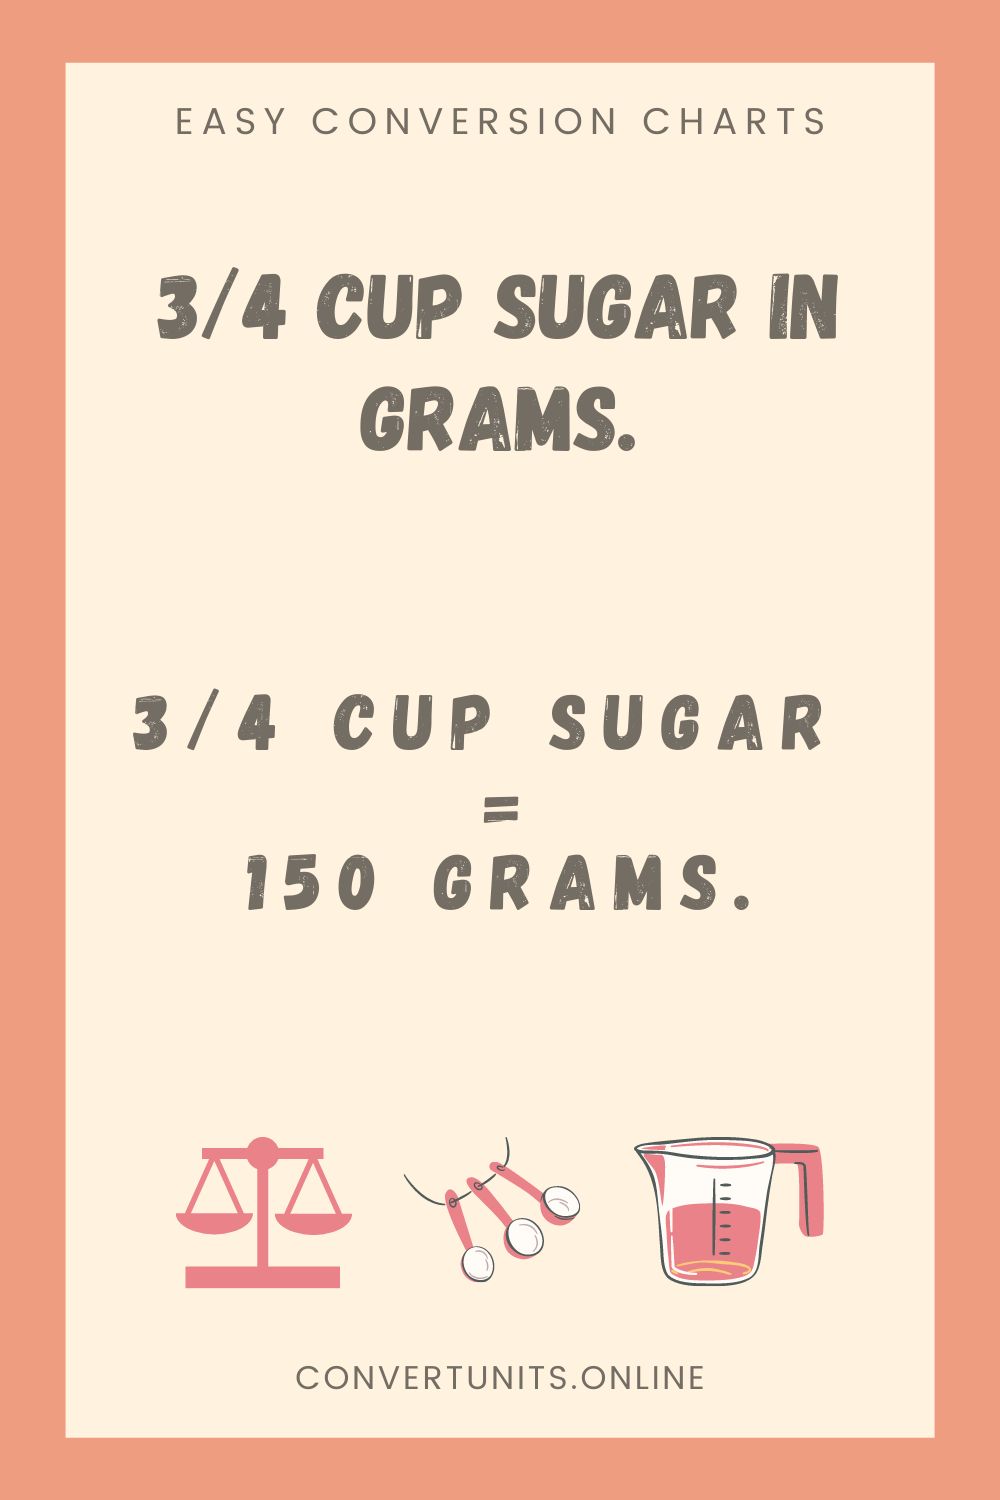 https://convertunits.online/wp-content/uploads/3_4-cup-sugar-in-grams.png